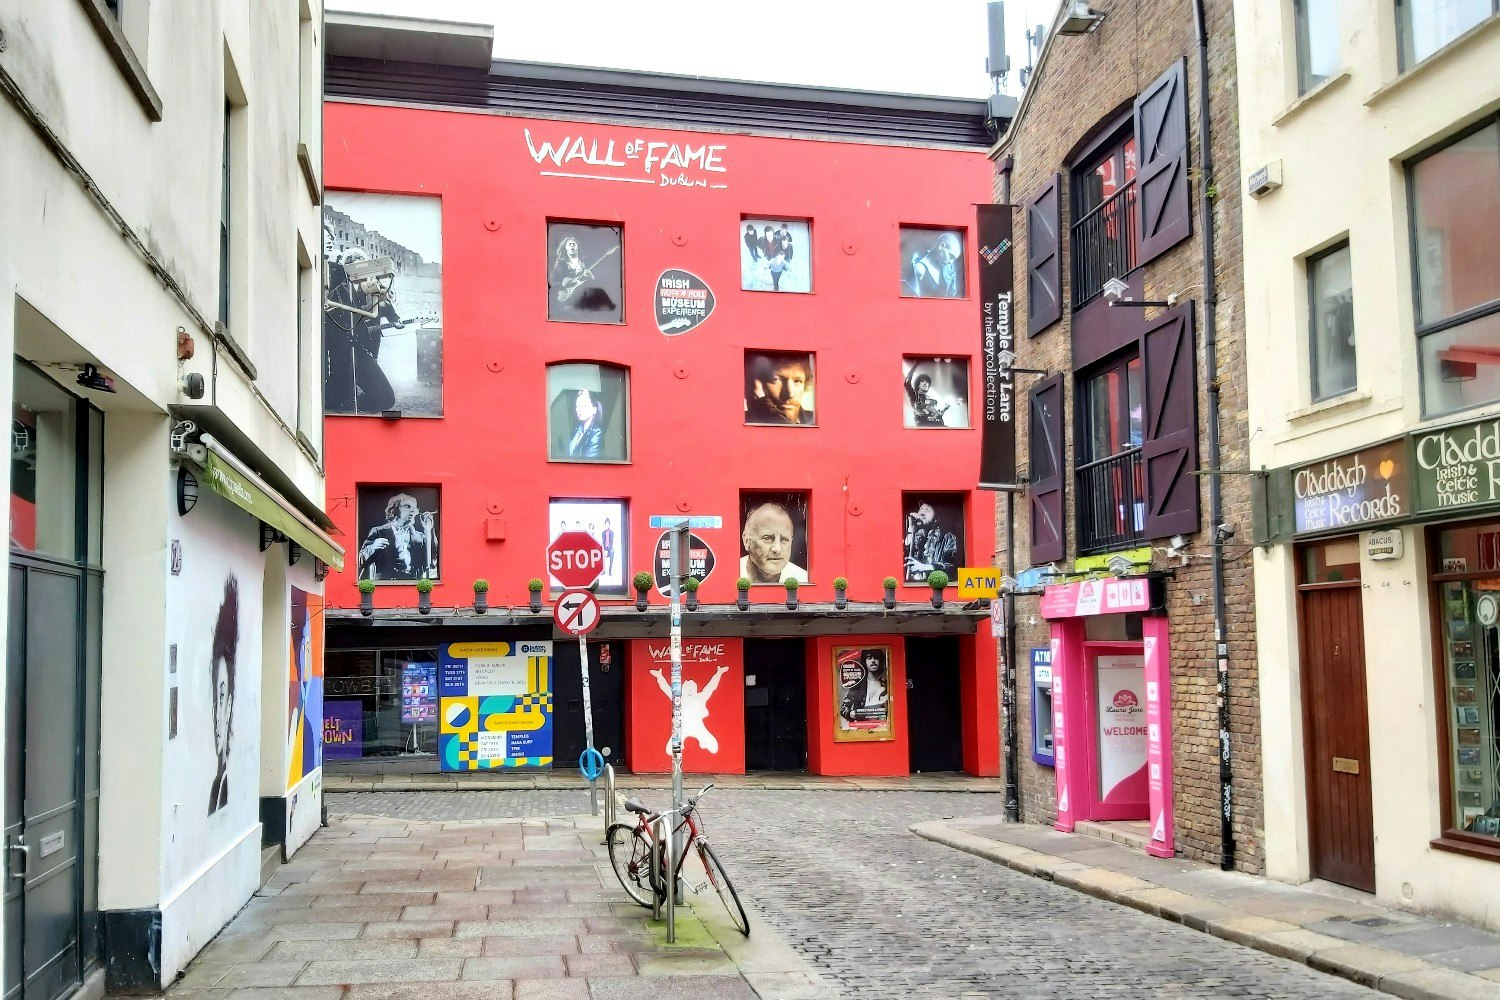 The wall of Fame in Temple Bar